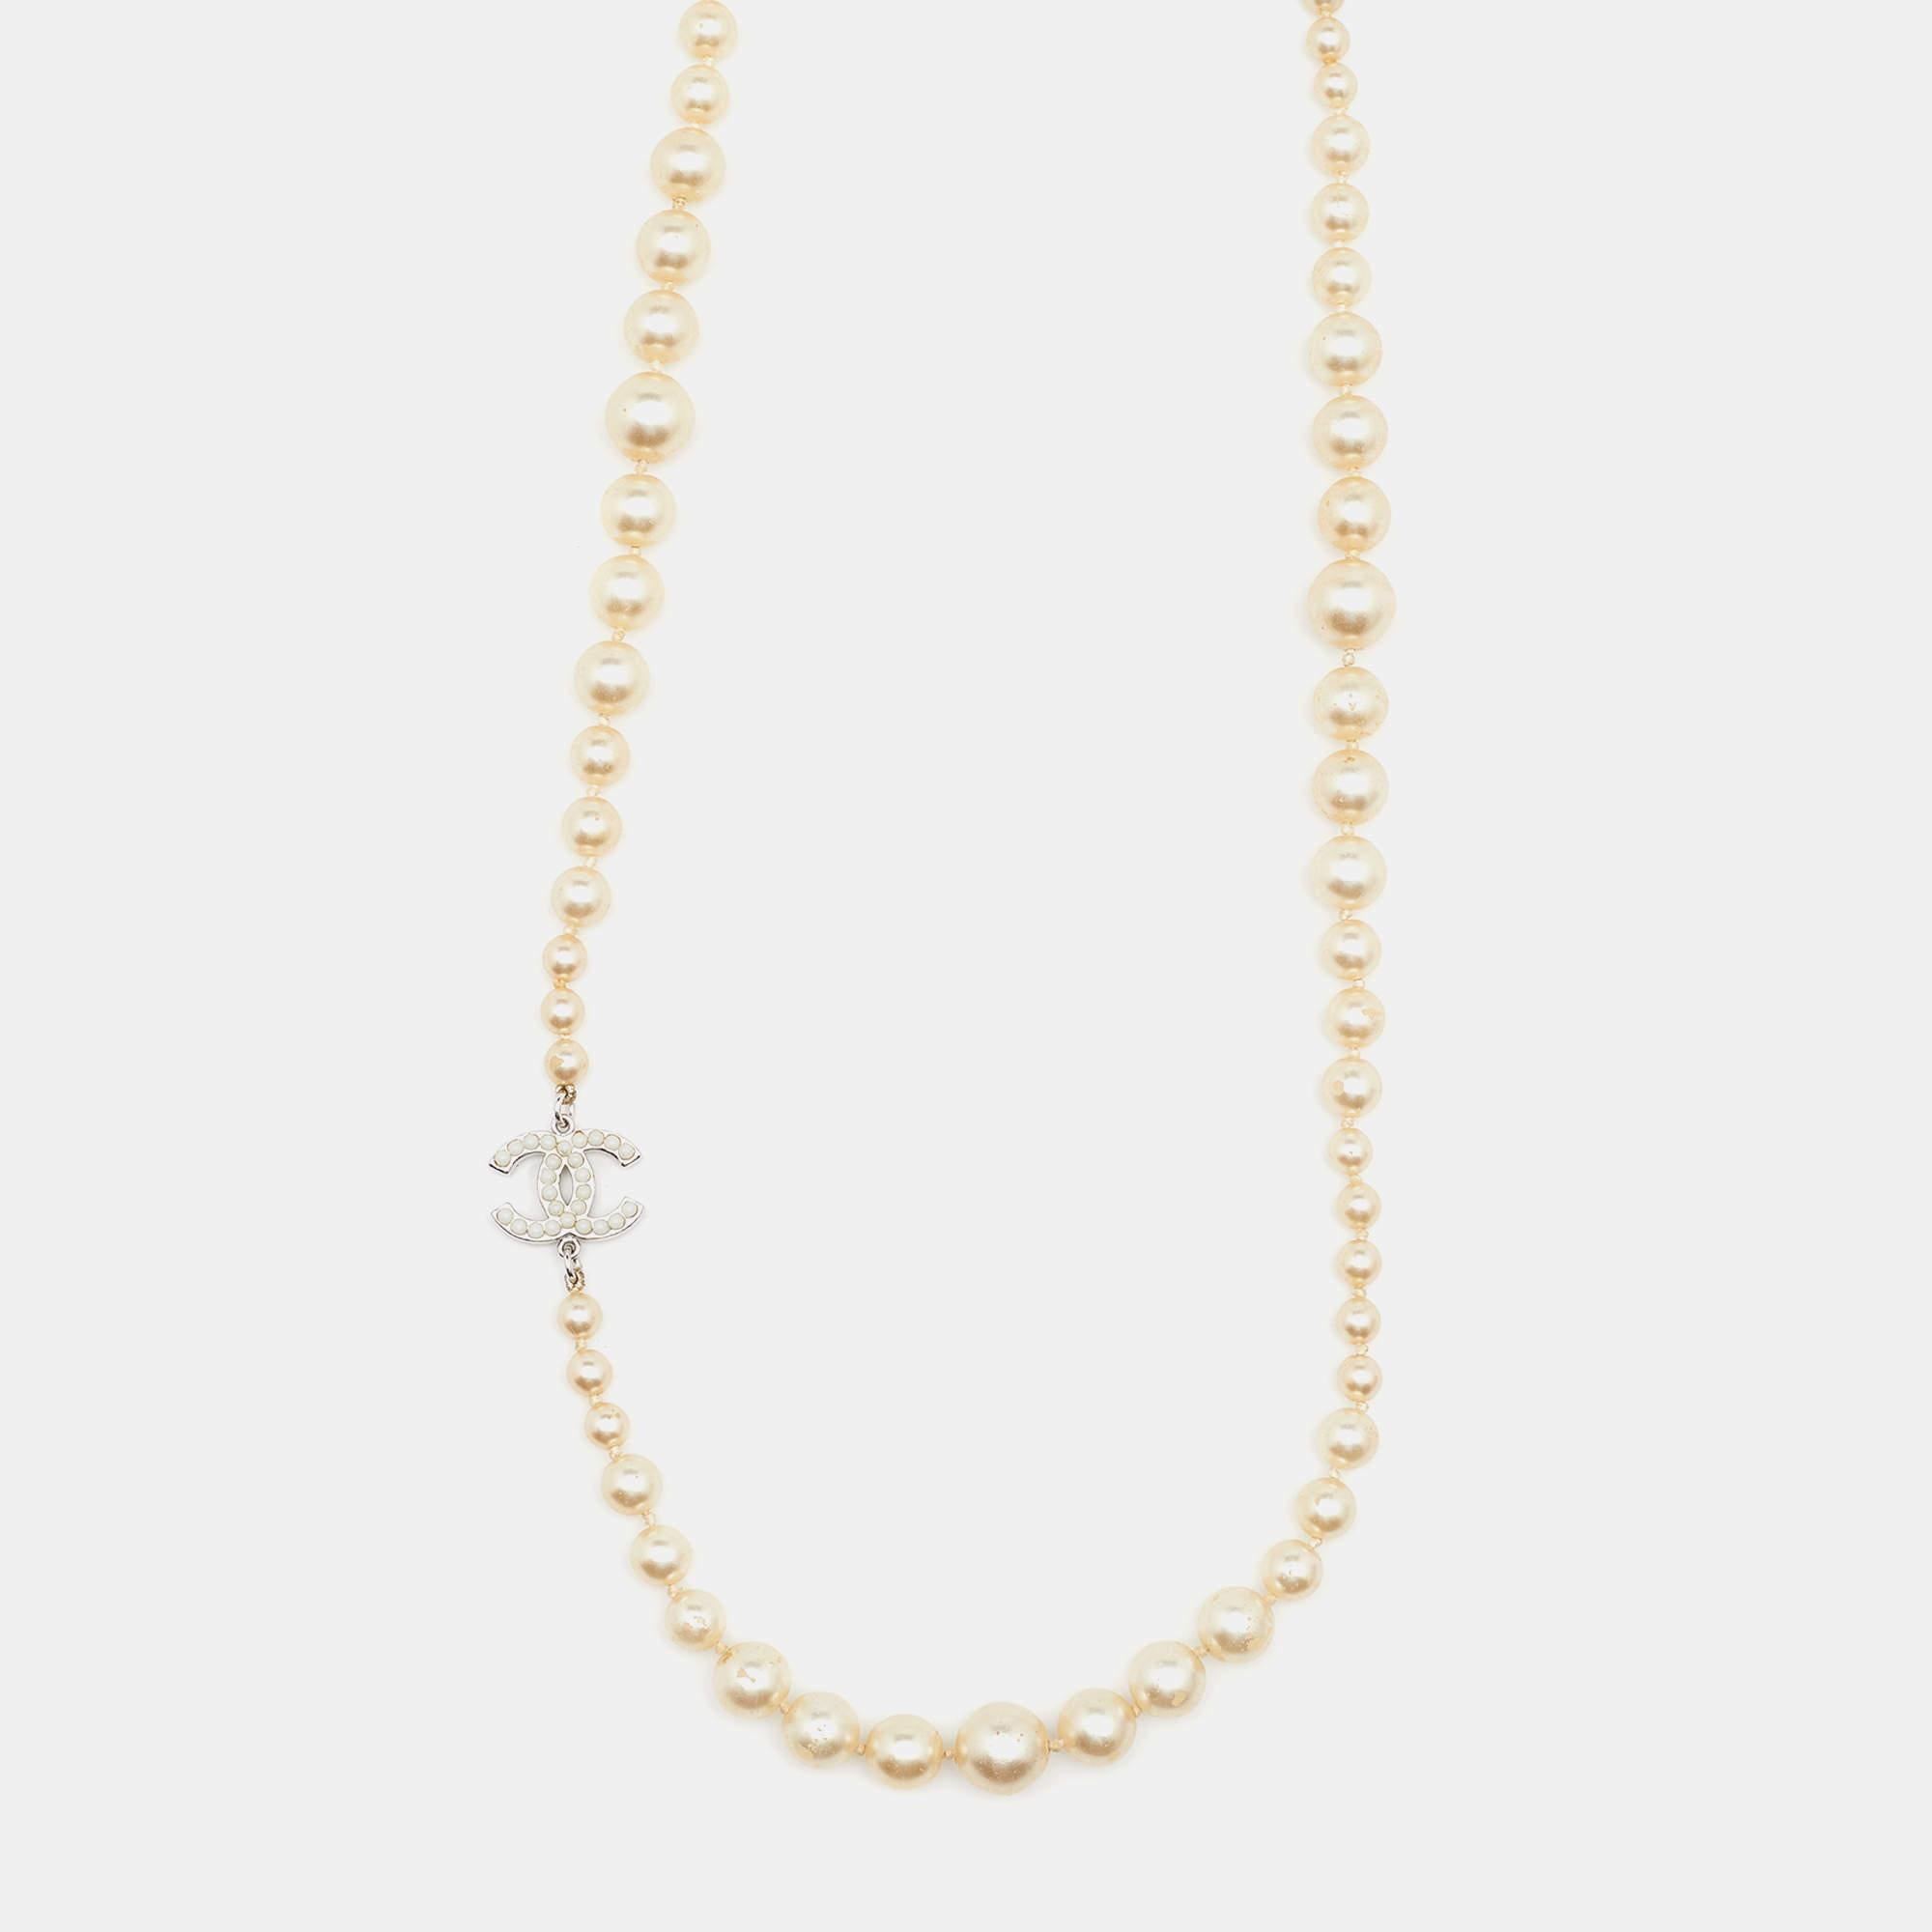 Assembled with faux pearls and the CC logo, this necklace from Chanel can be worn as is or doubled up for a layered look. It has a classy appeal and will complement a variety of outfits, from a simple black dress to a Chanel tweed suit.

